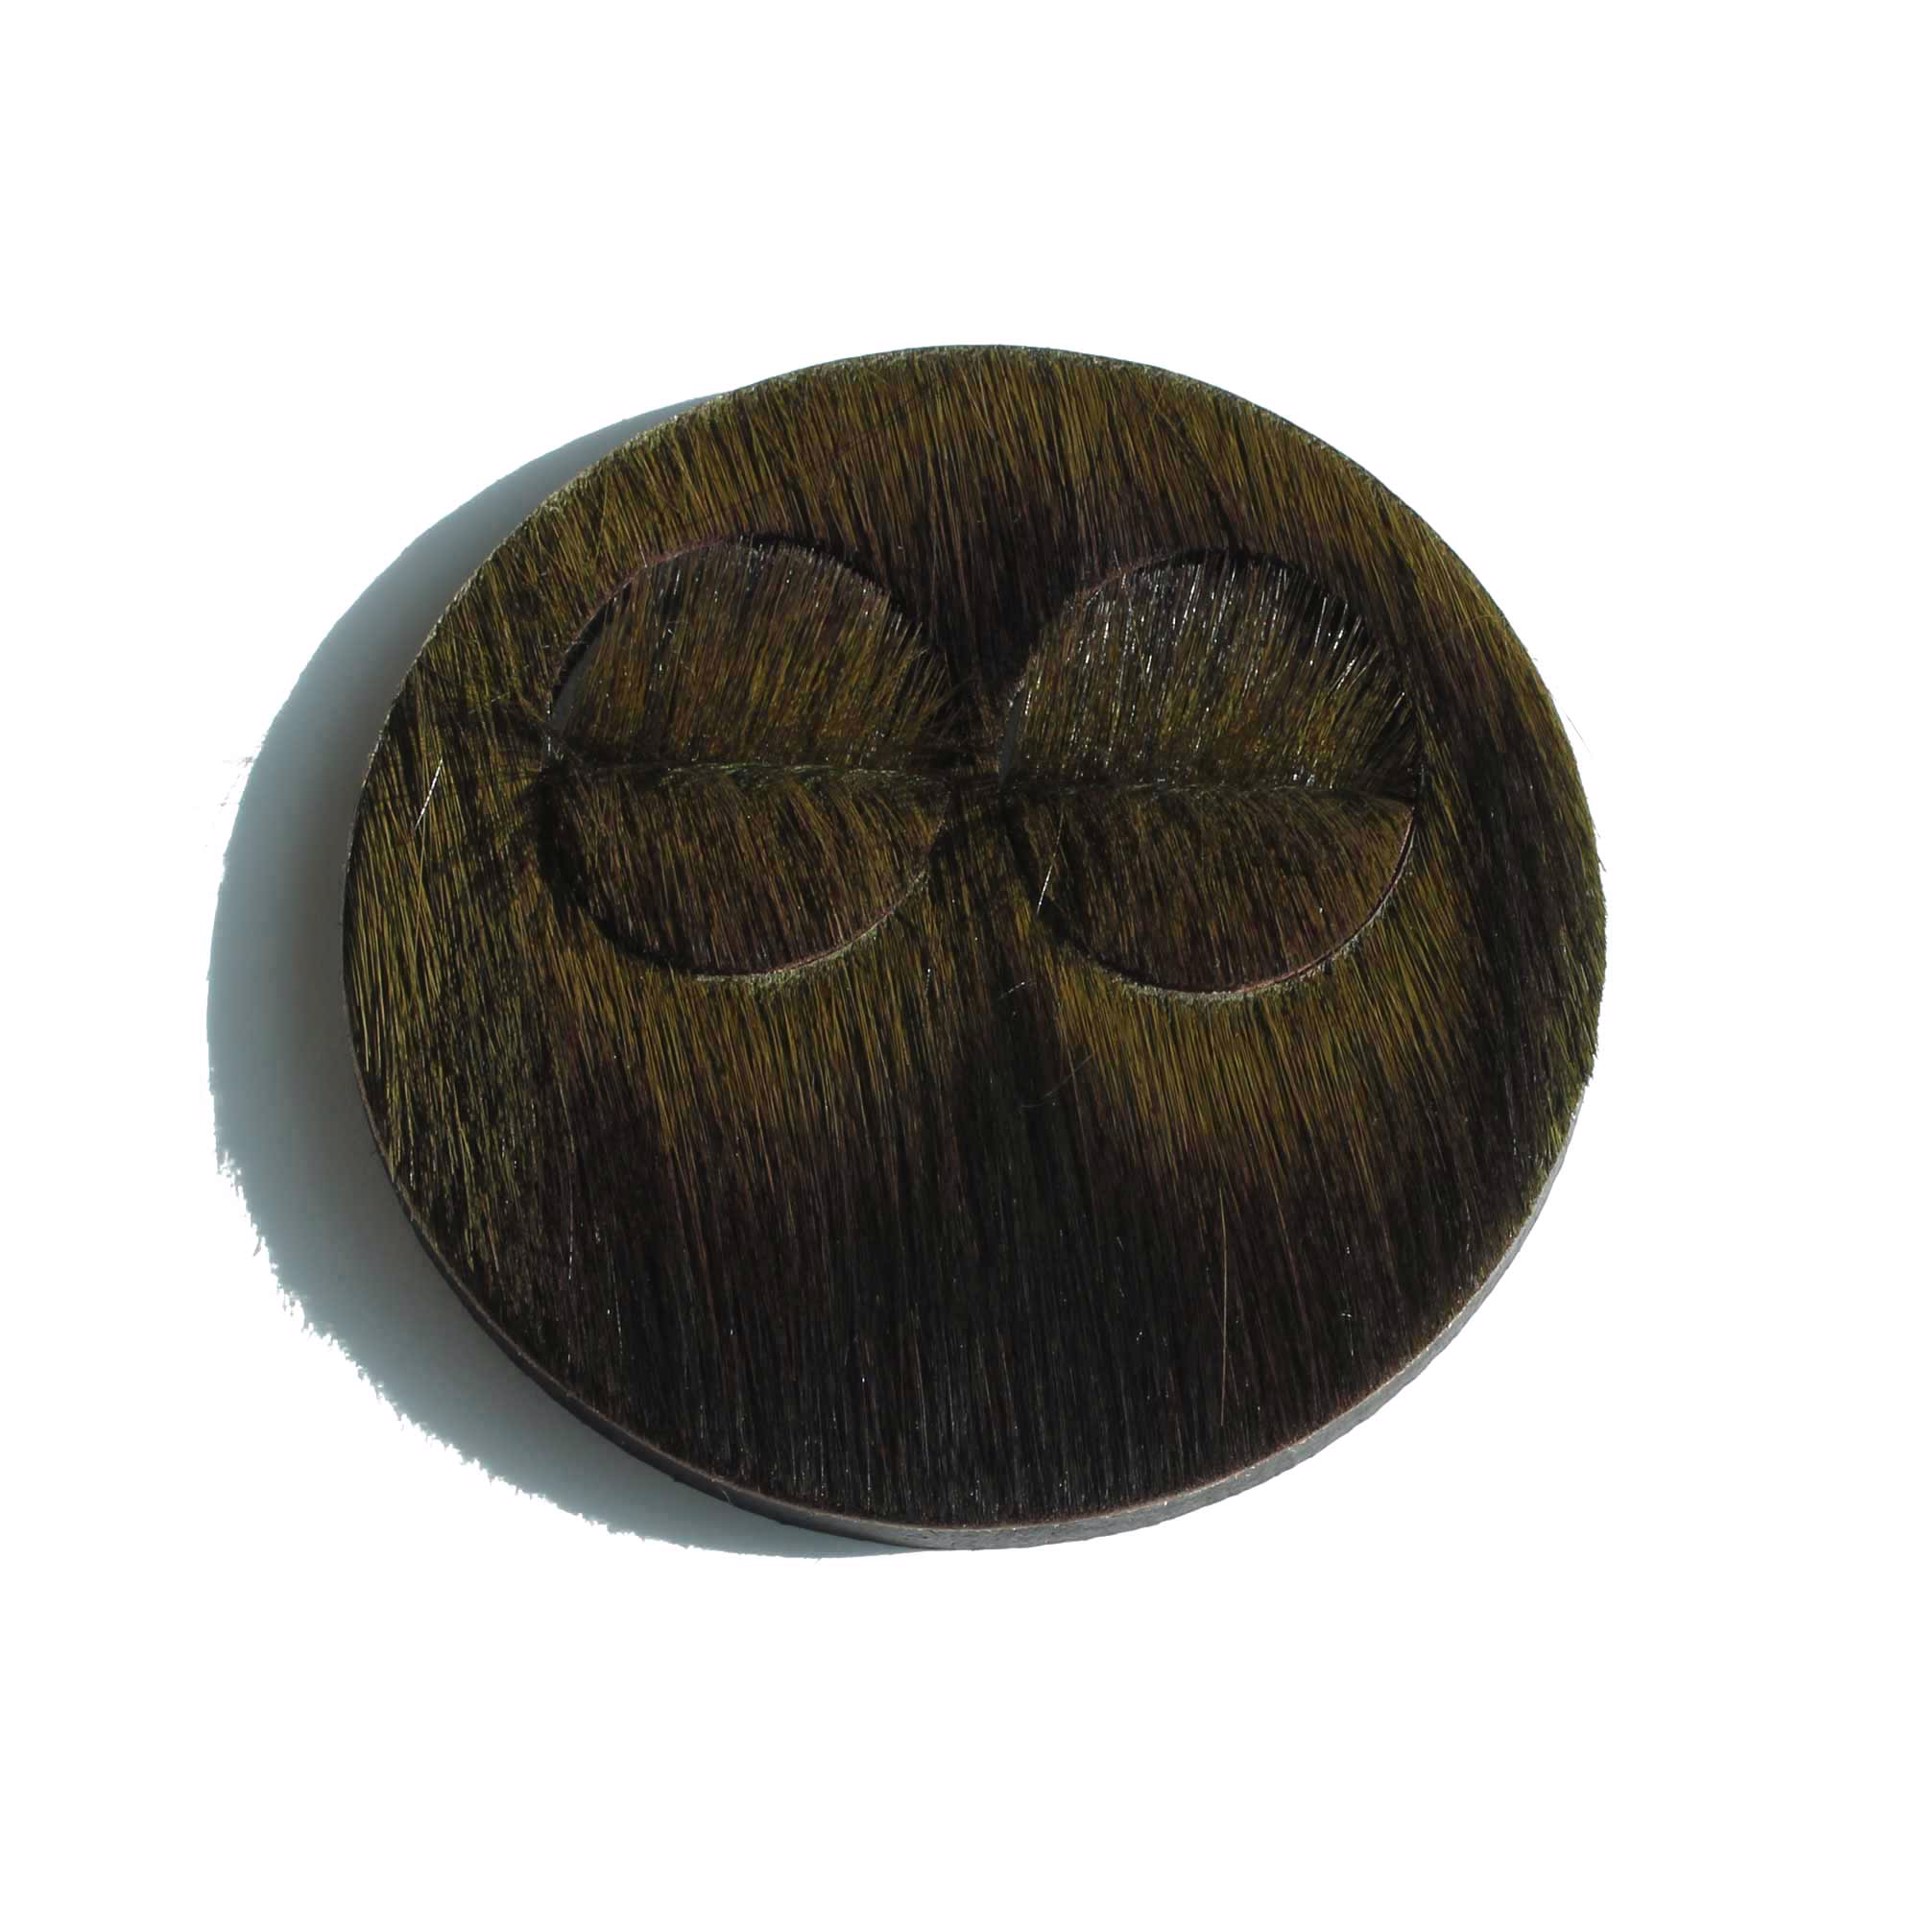 Mr. Moss Brooch by Lore Langendries